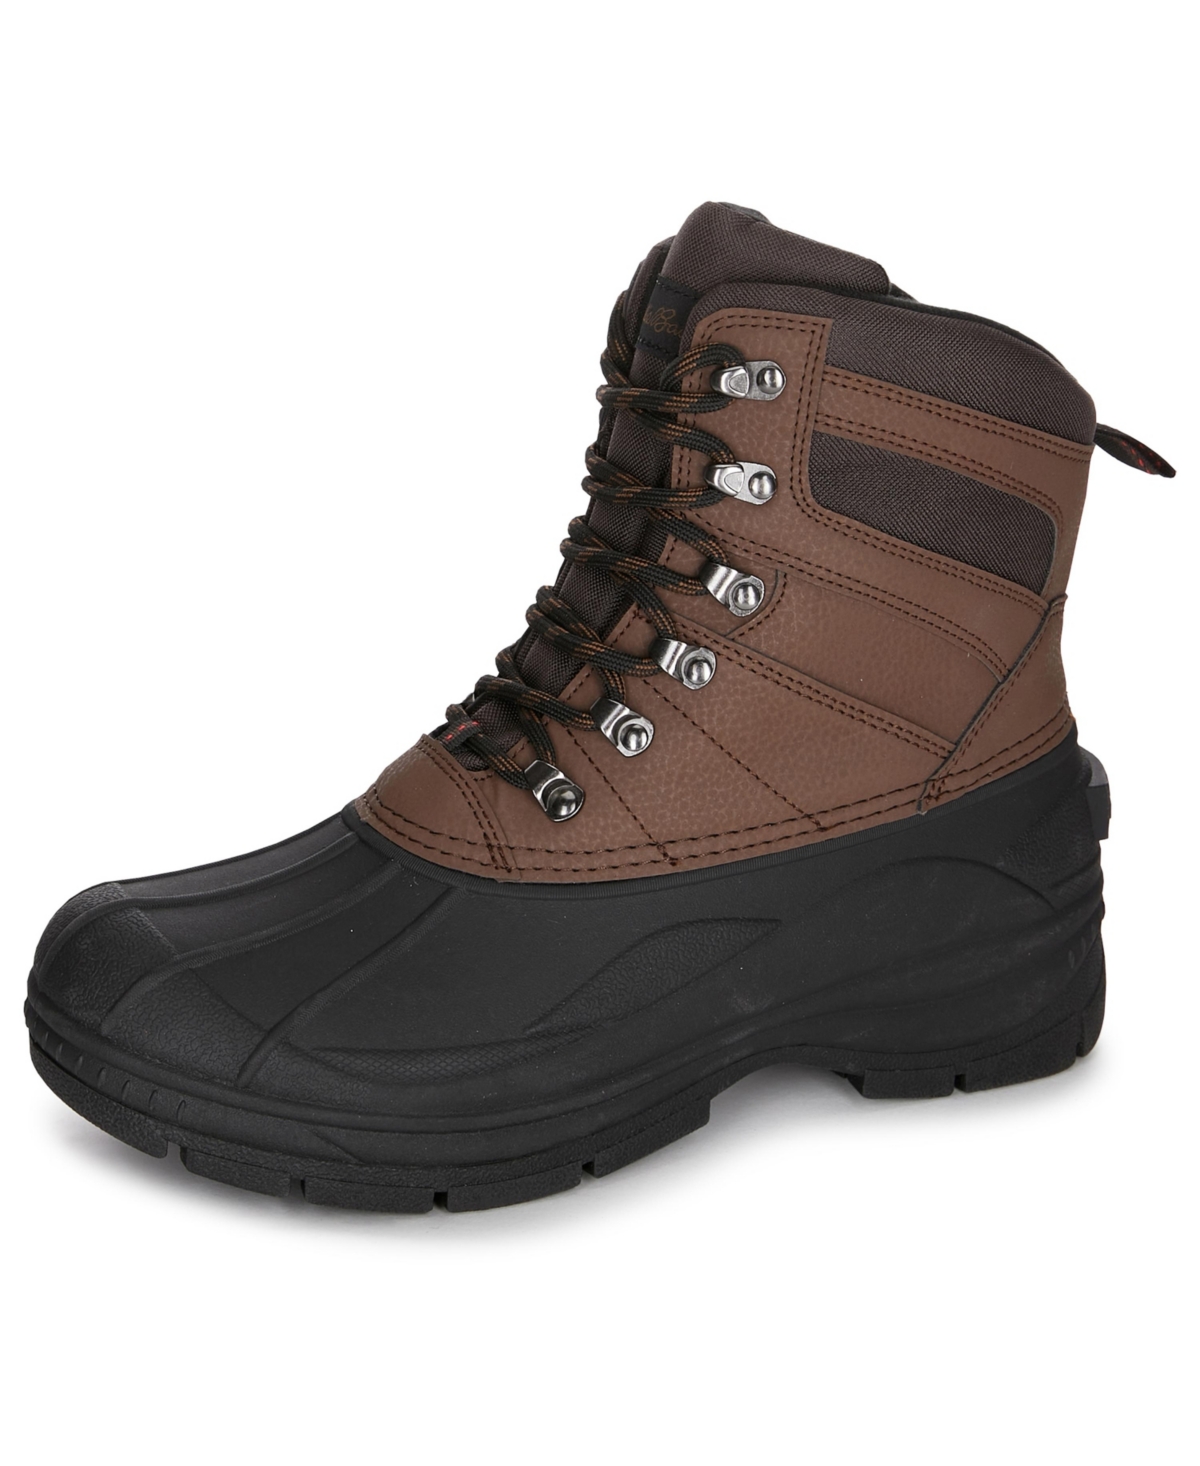 Men's Leaven Worth Hiking Lace-Up Boots - Brown